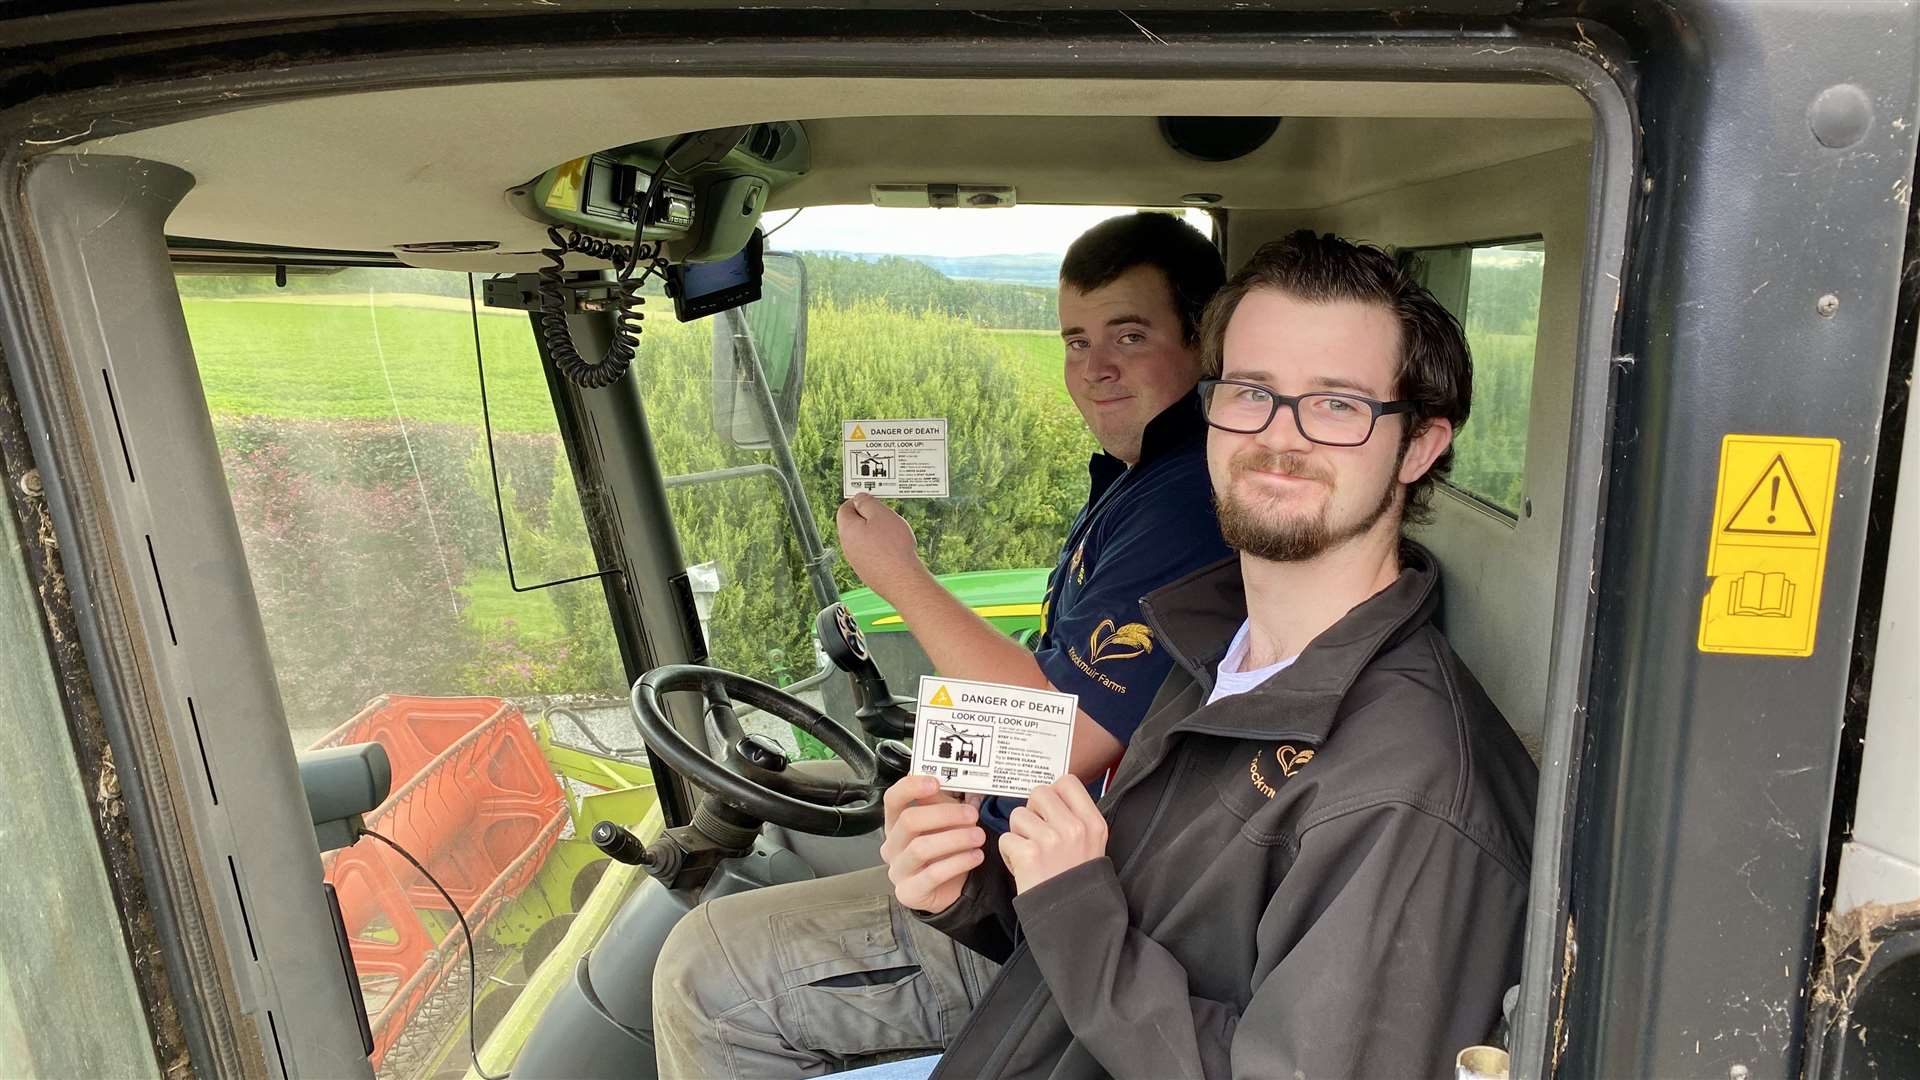 Ewan (in blue) and Ross with the SSEN farm safety stickers.